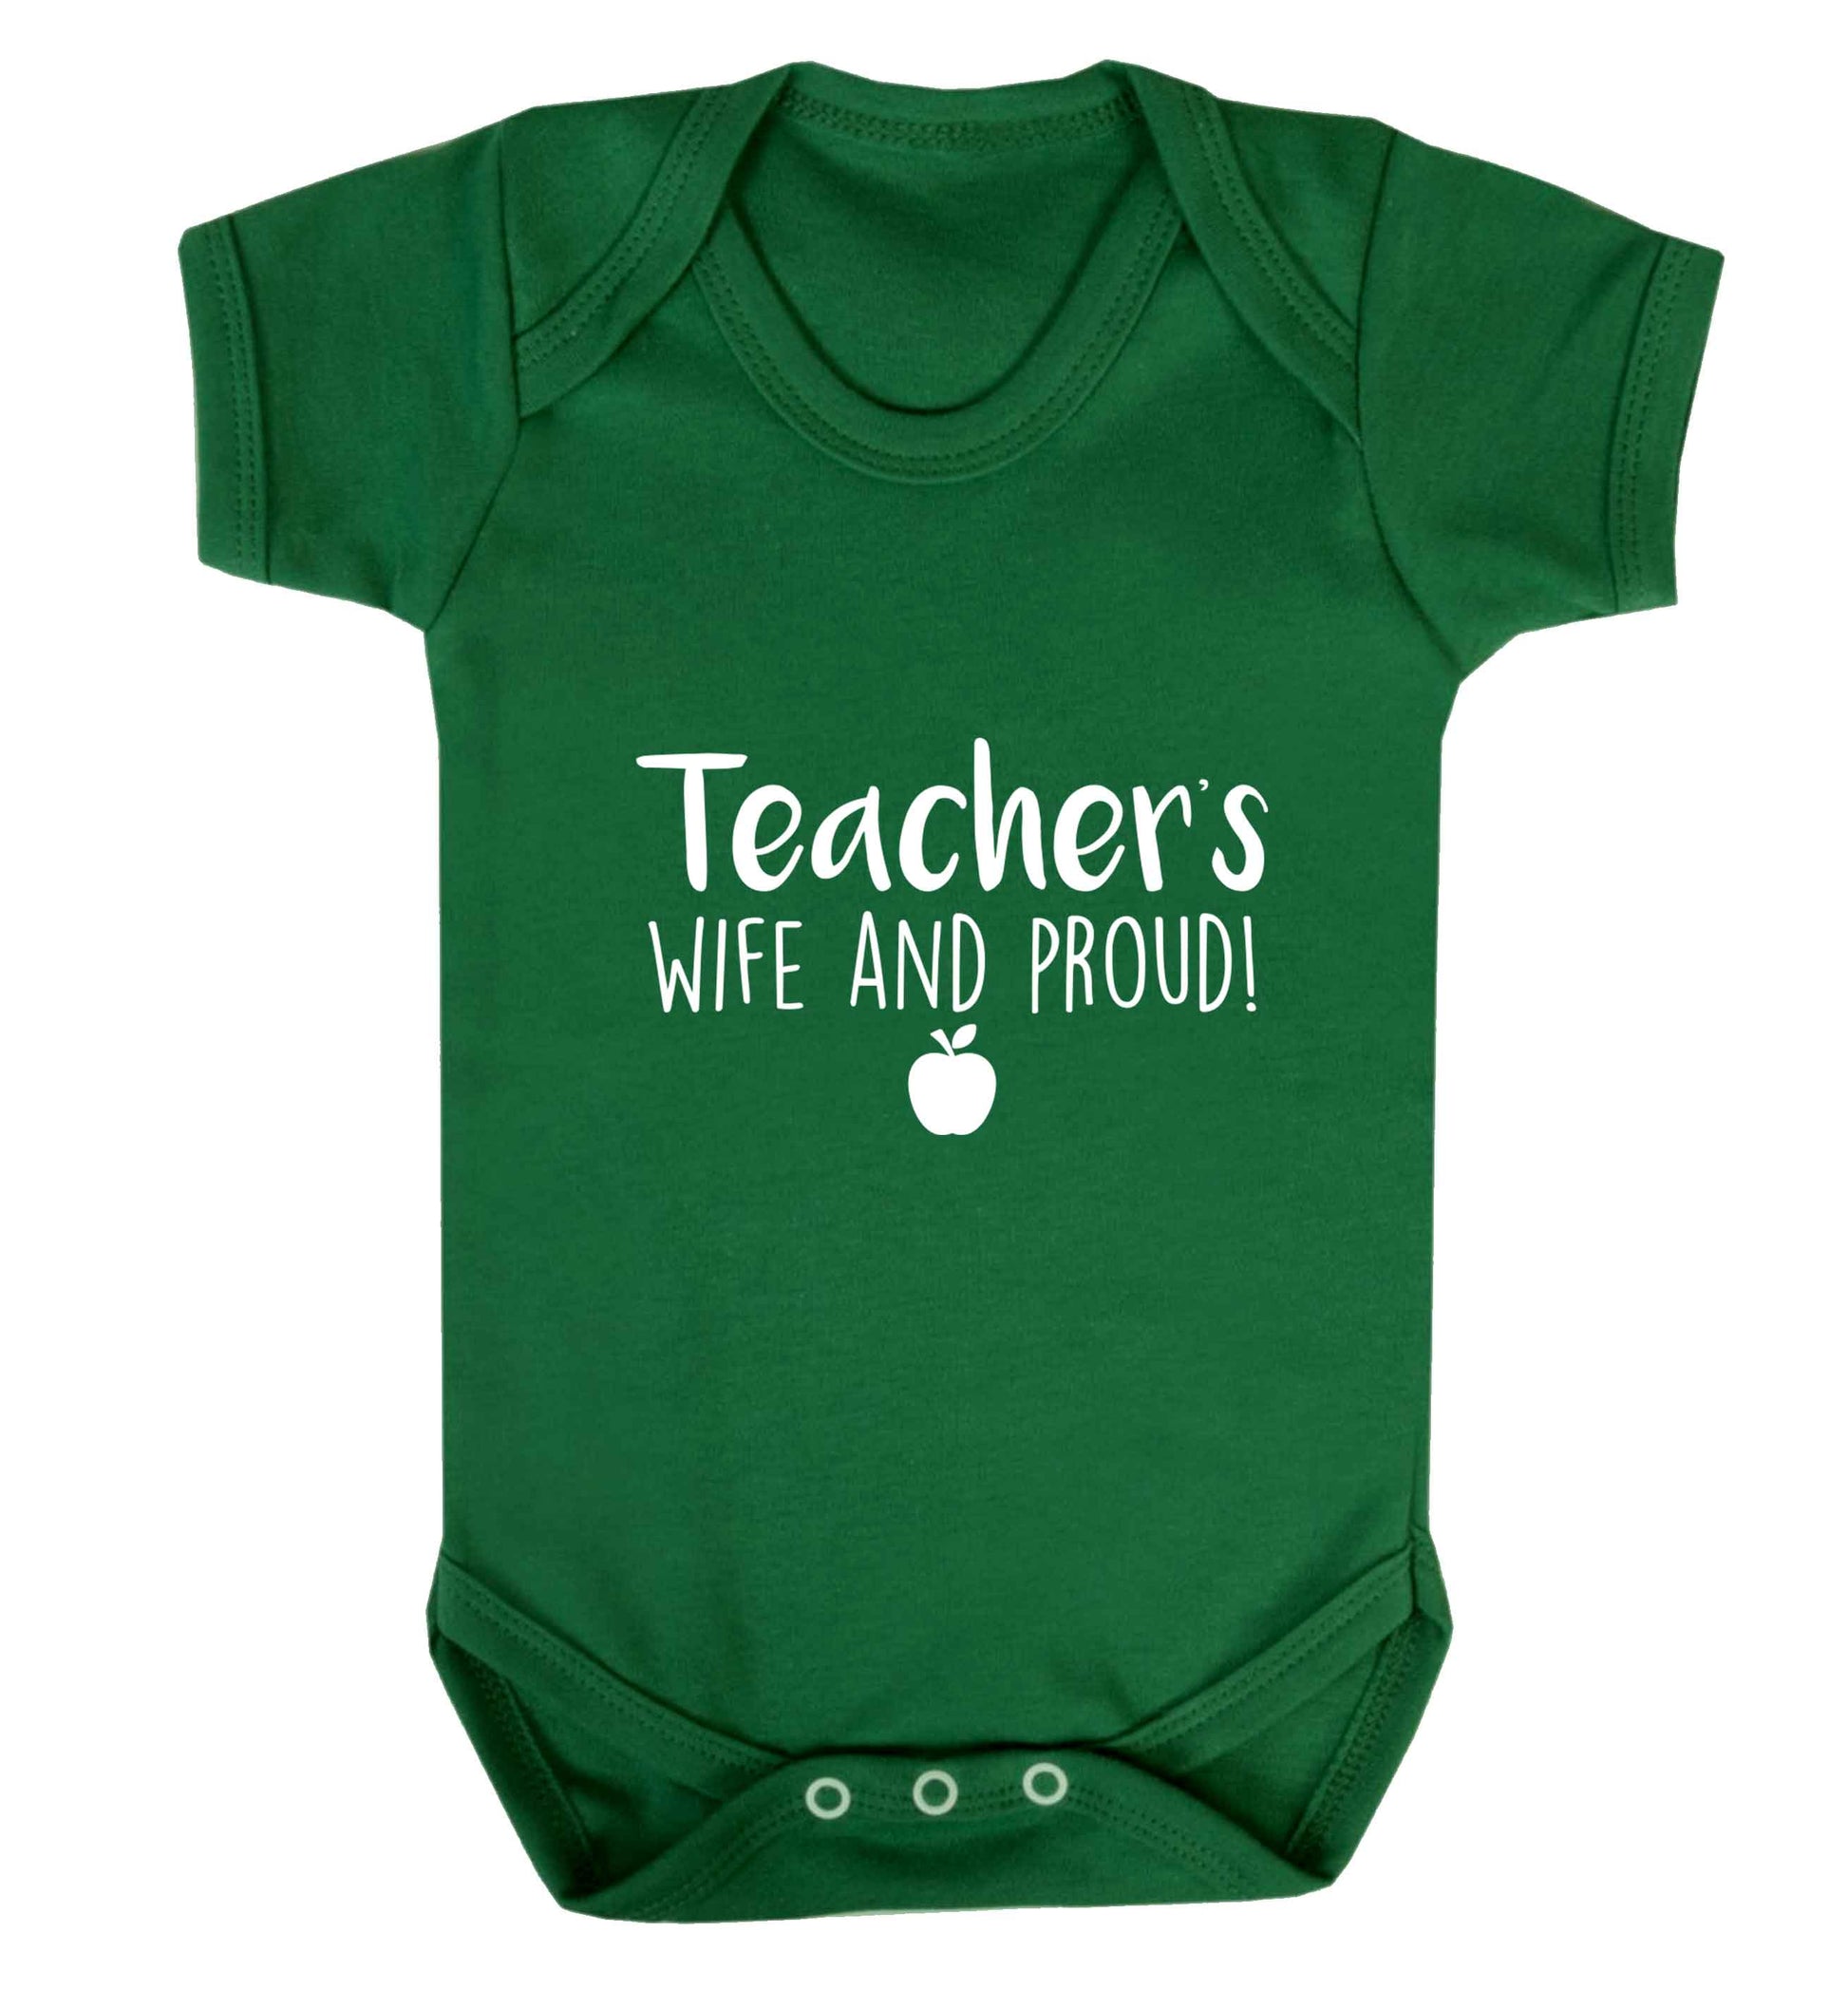 Teachers wife and proud baby vest green 18-24 months